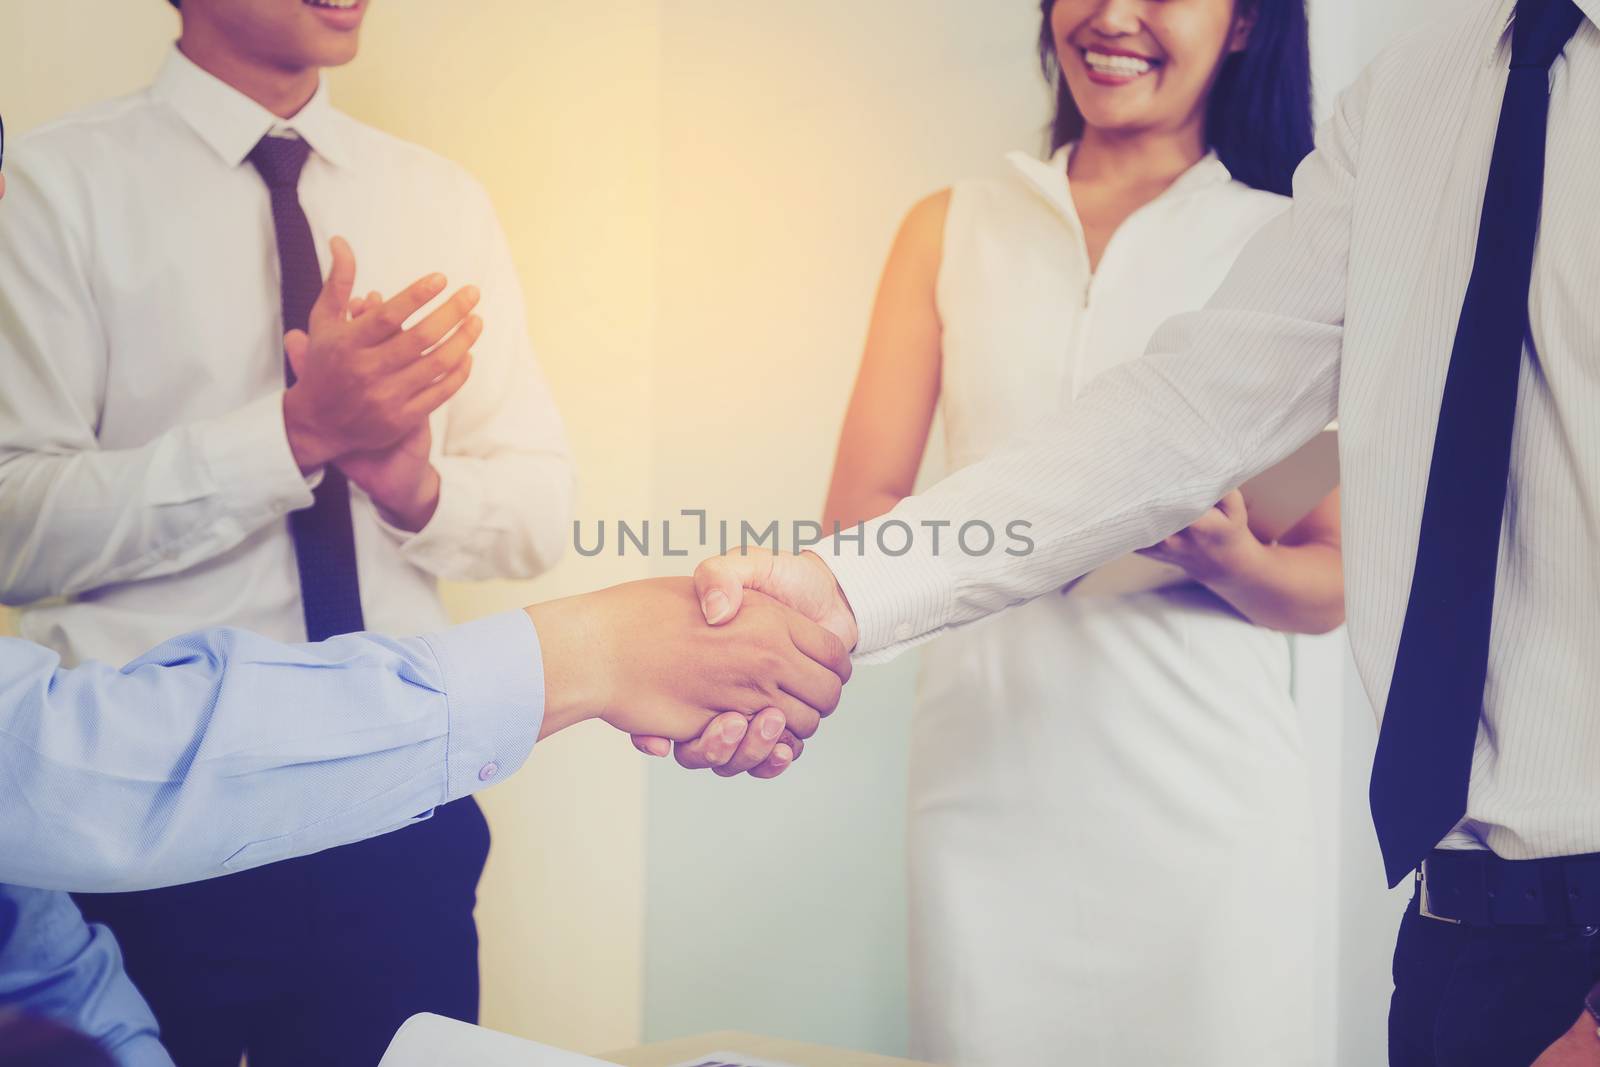 Businessmen negotiate in a coffee shop. Hold hands and greet before the business talks comfortably.